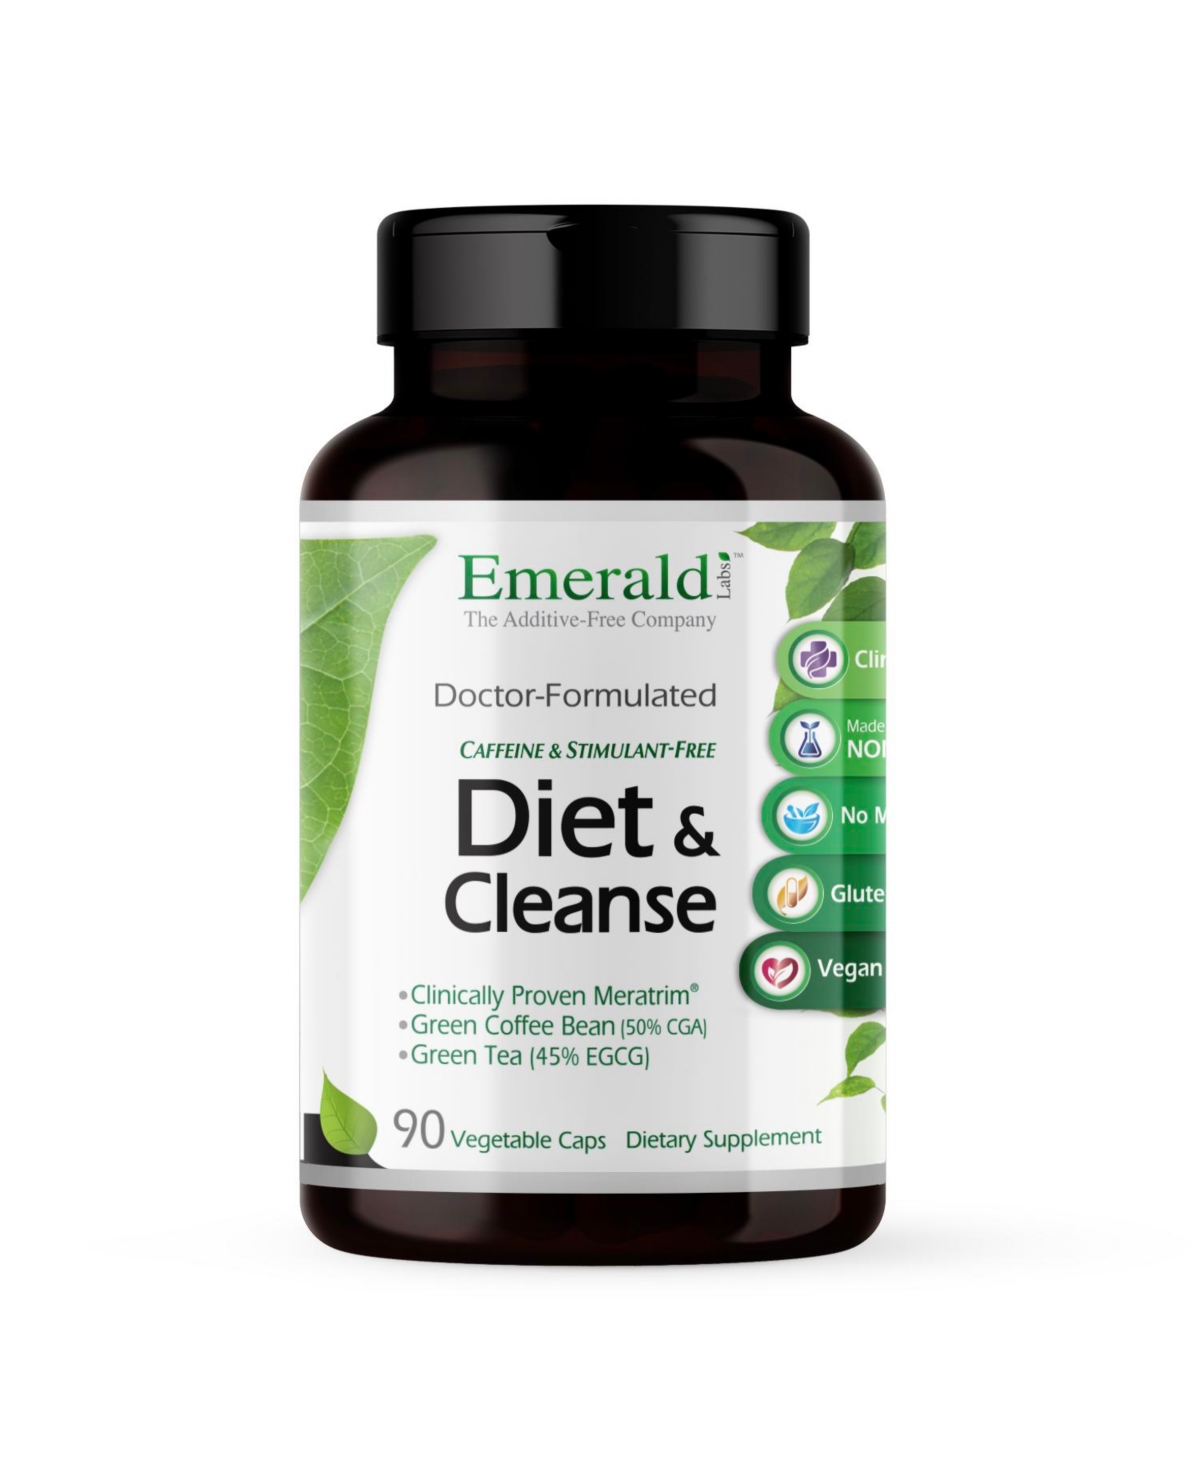 Diet & Cleanse - With Meratrim, Green Tea, Green Coffee Bean, Glucomannan, Milk Thistle, and Triphala - 90 Vegetable Capsules